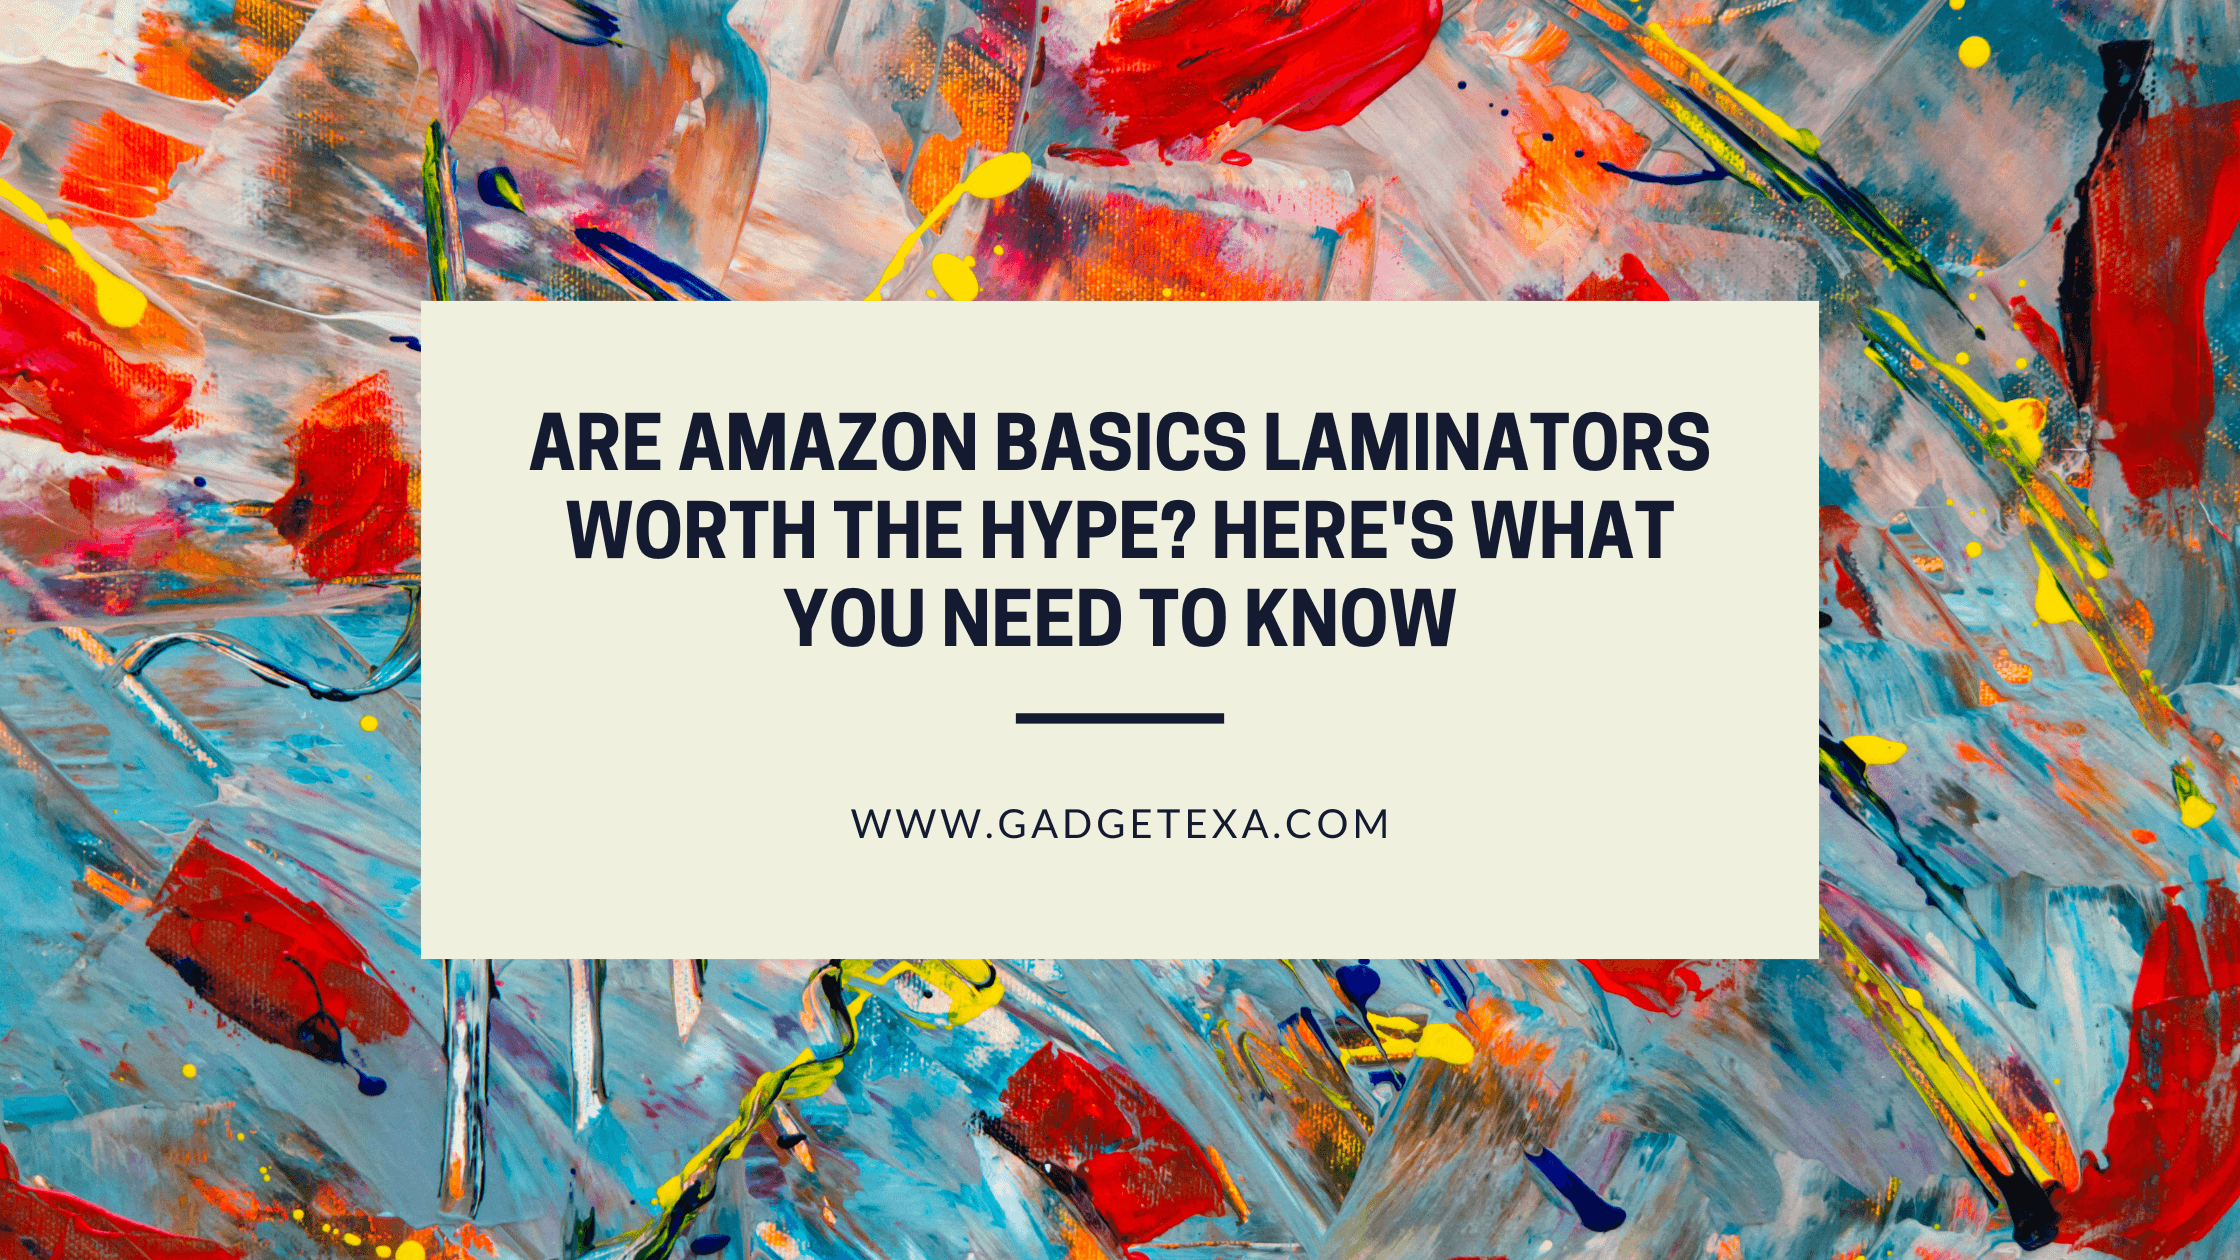 You are currently viewing Are Amazon Basics Laminators Worth the Hype Here’s What You Need to Know